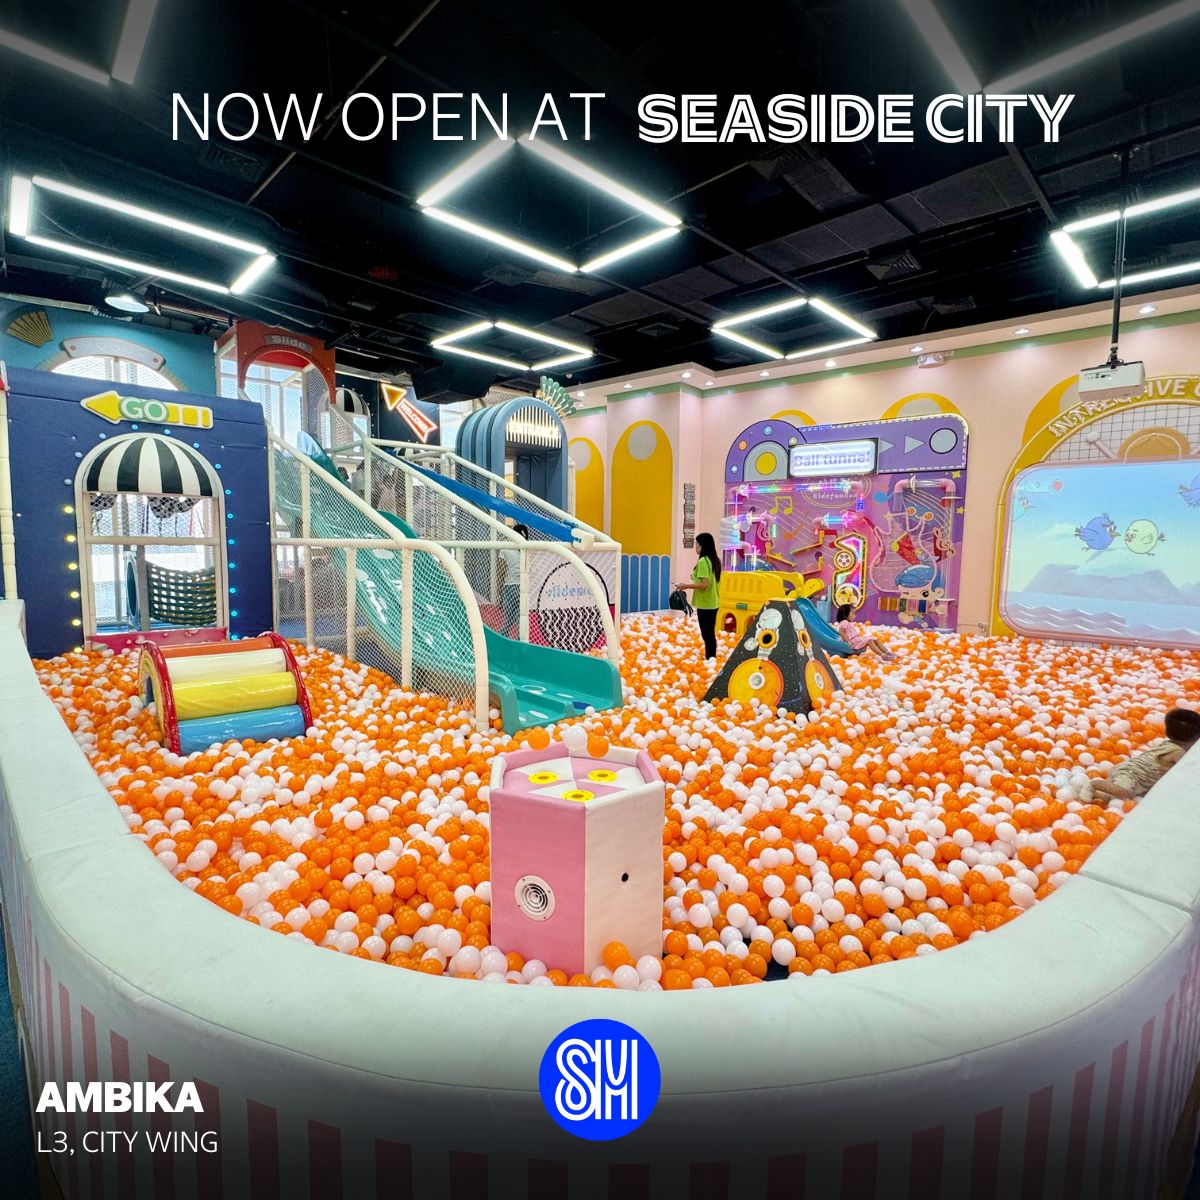 ✨ What's New at Seaside City ✨ Let the adventure begin as Ambika is now open to spark joy and ignite imaginations! Gather the #SuperKids and come play, explore, and make memories with Ambika! 🌈🎪 📍Third Level, City Wing #EverythingsHereAtSM #AWorldOfExperienceAtSM